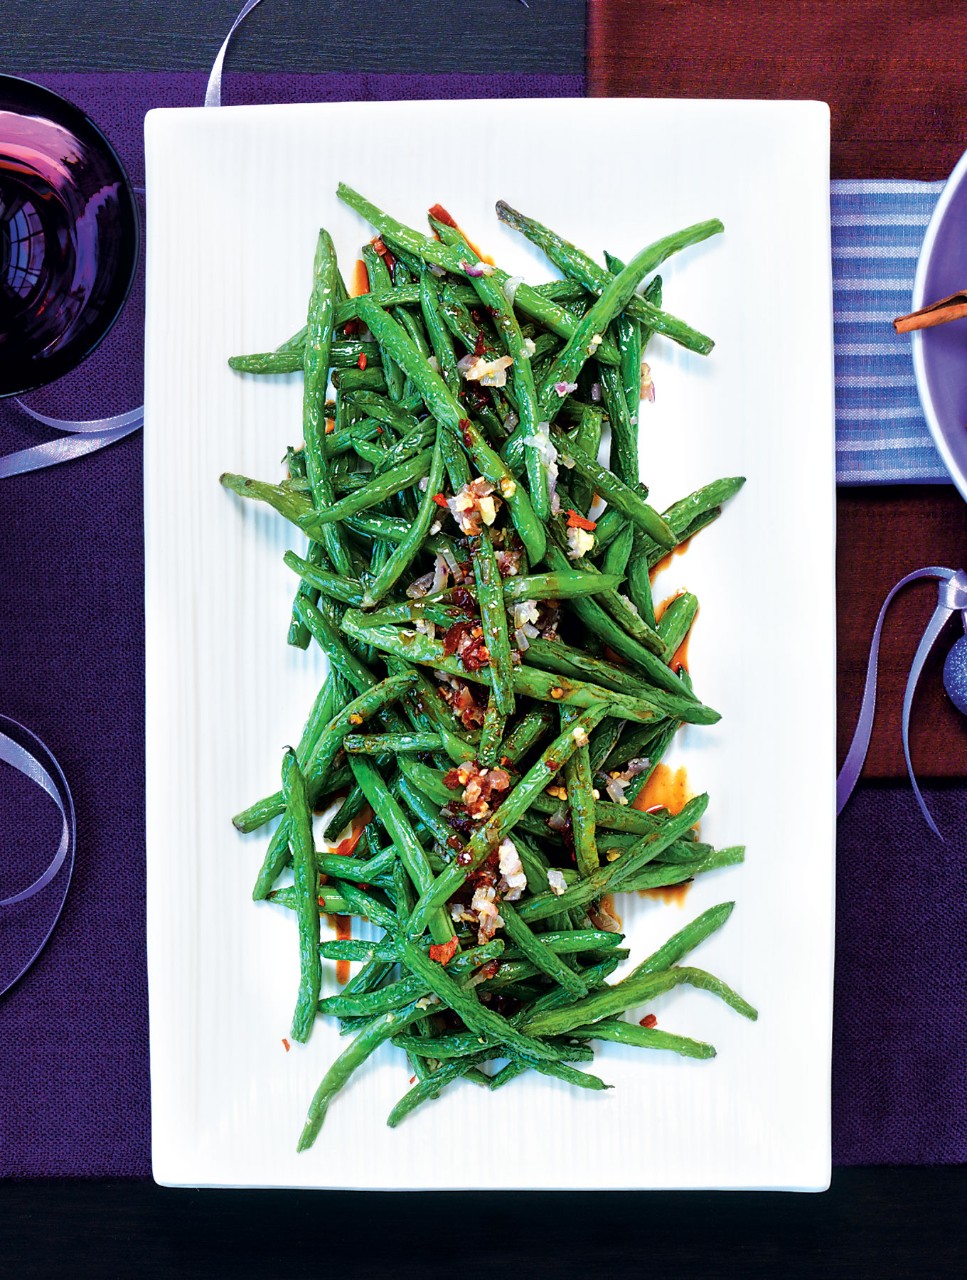 Dry Fried Green Beans